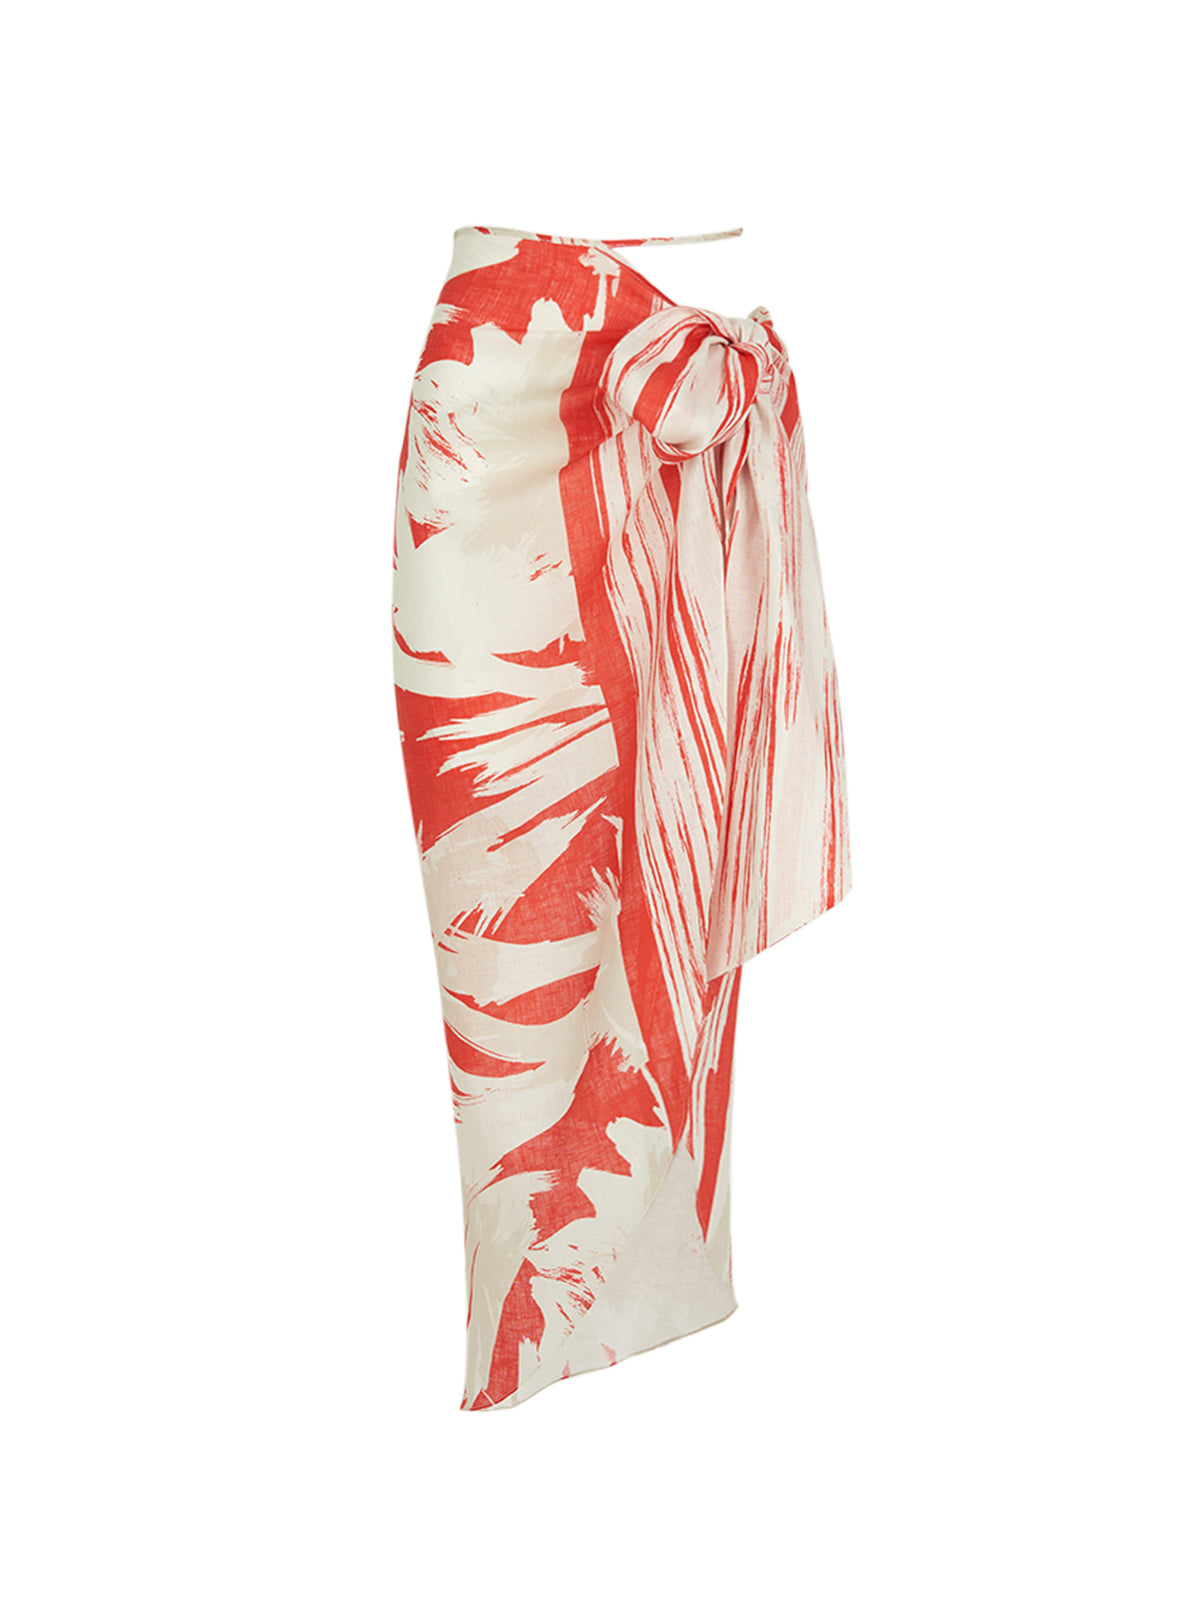 Alice Skirt Coral Red Palm Print